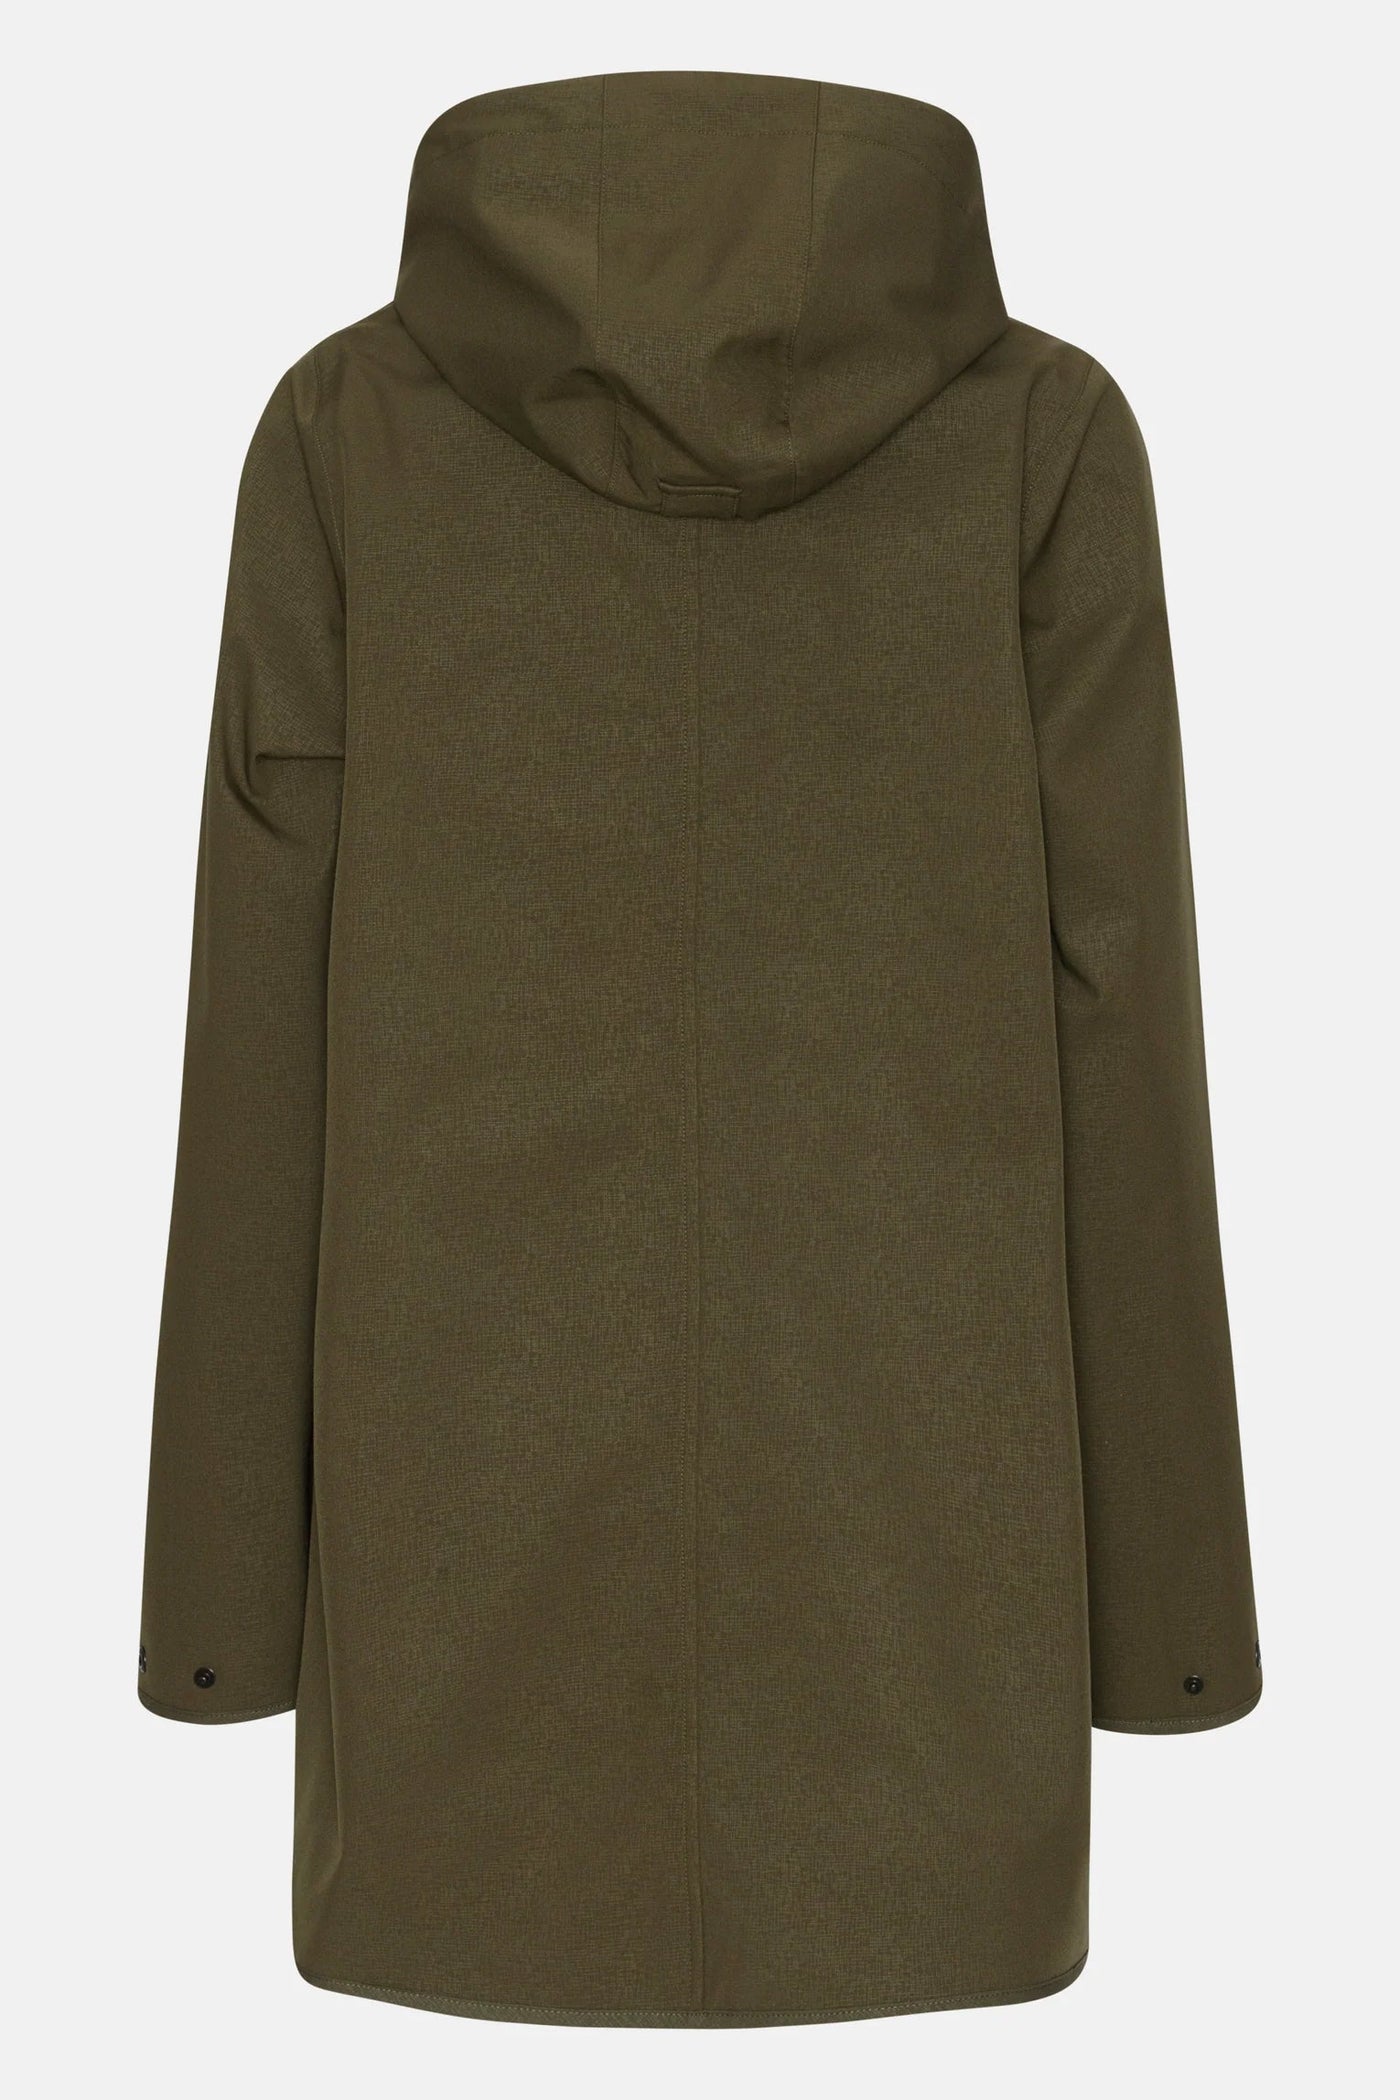 Ilse Jacobsen Rain135 In Army-Womens-Ohh! By Gum - Shop Sustainable